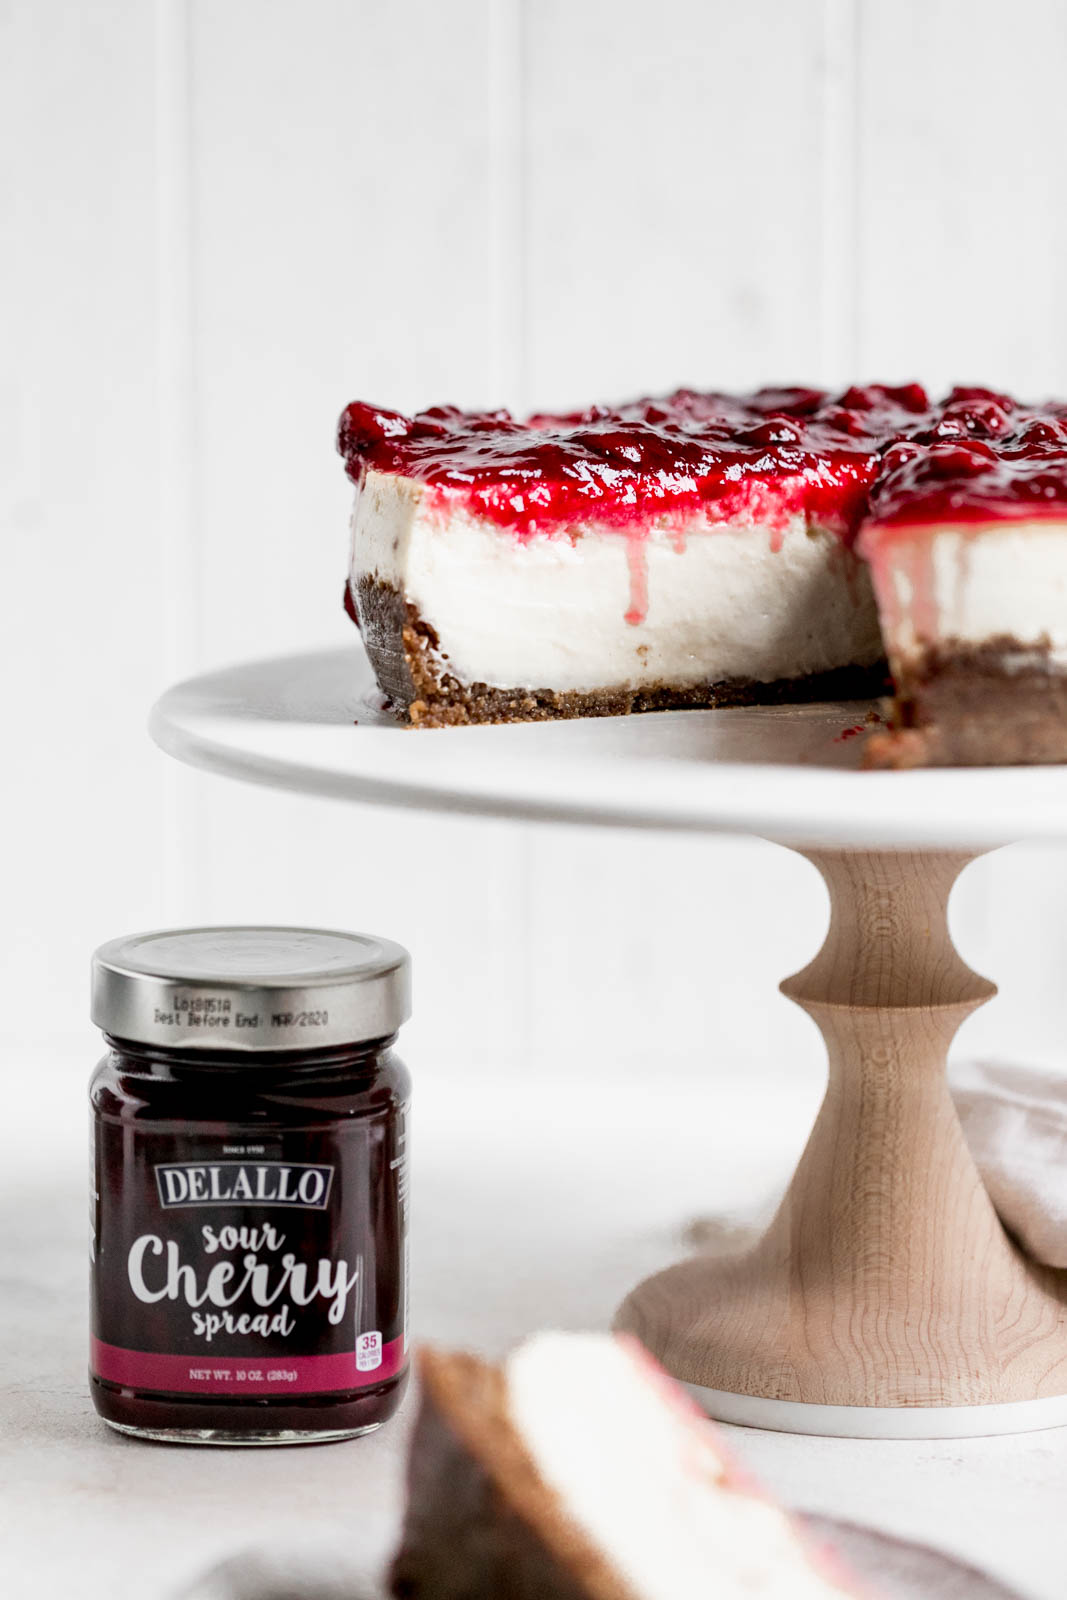 How to make the perfect cheesecake: to get that luxuriously smooth cheesecake baked to perfection, you've got to follow these tried and tested steps. 